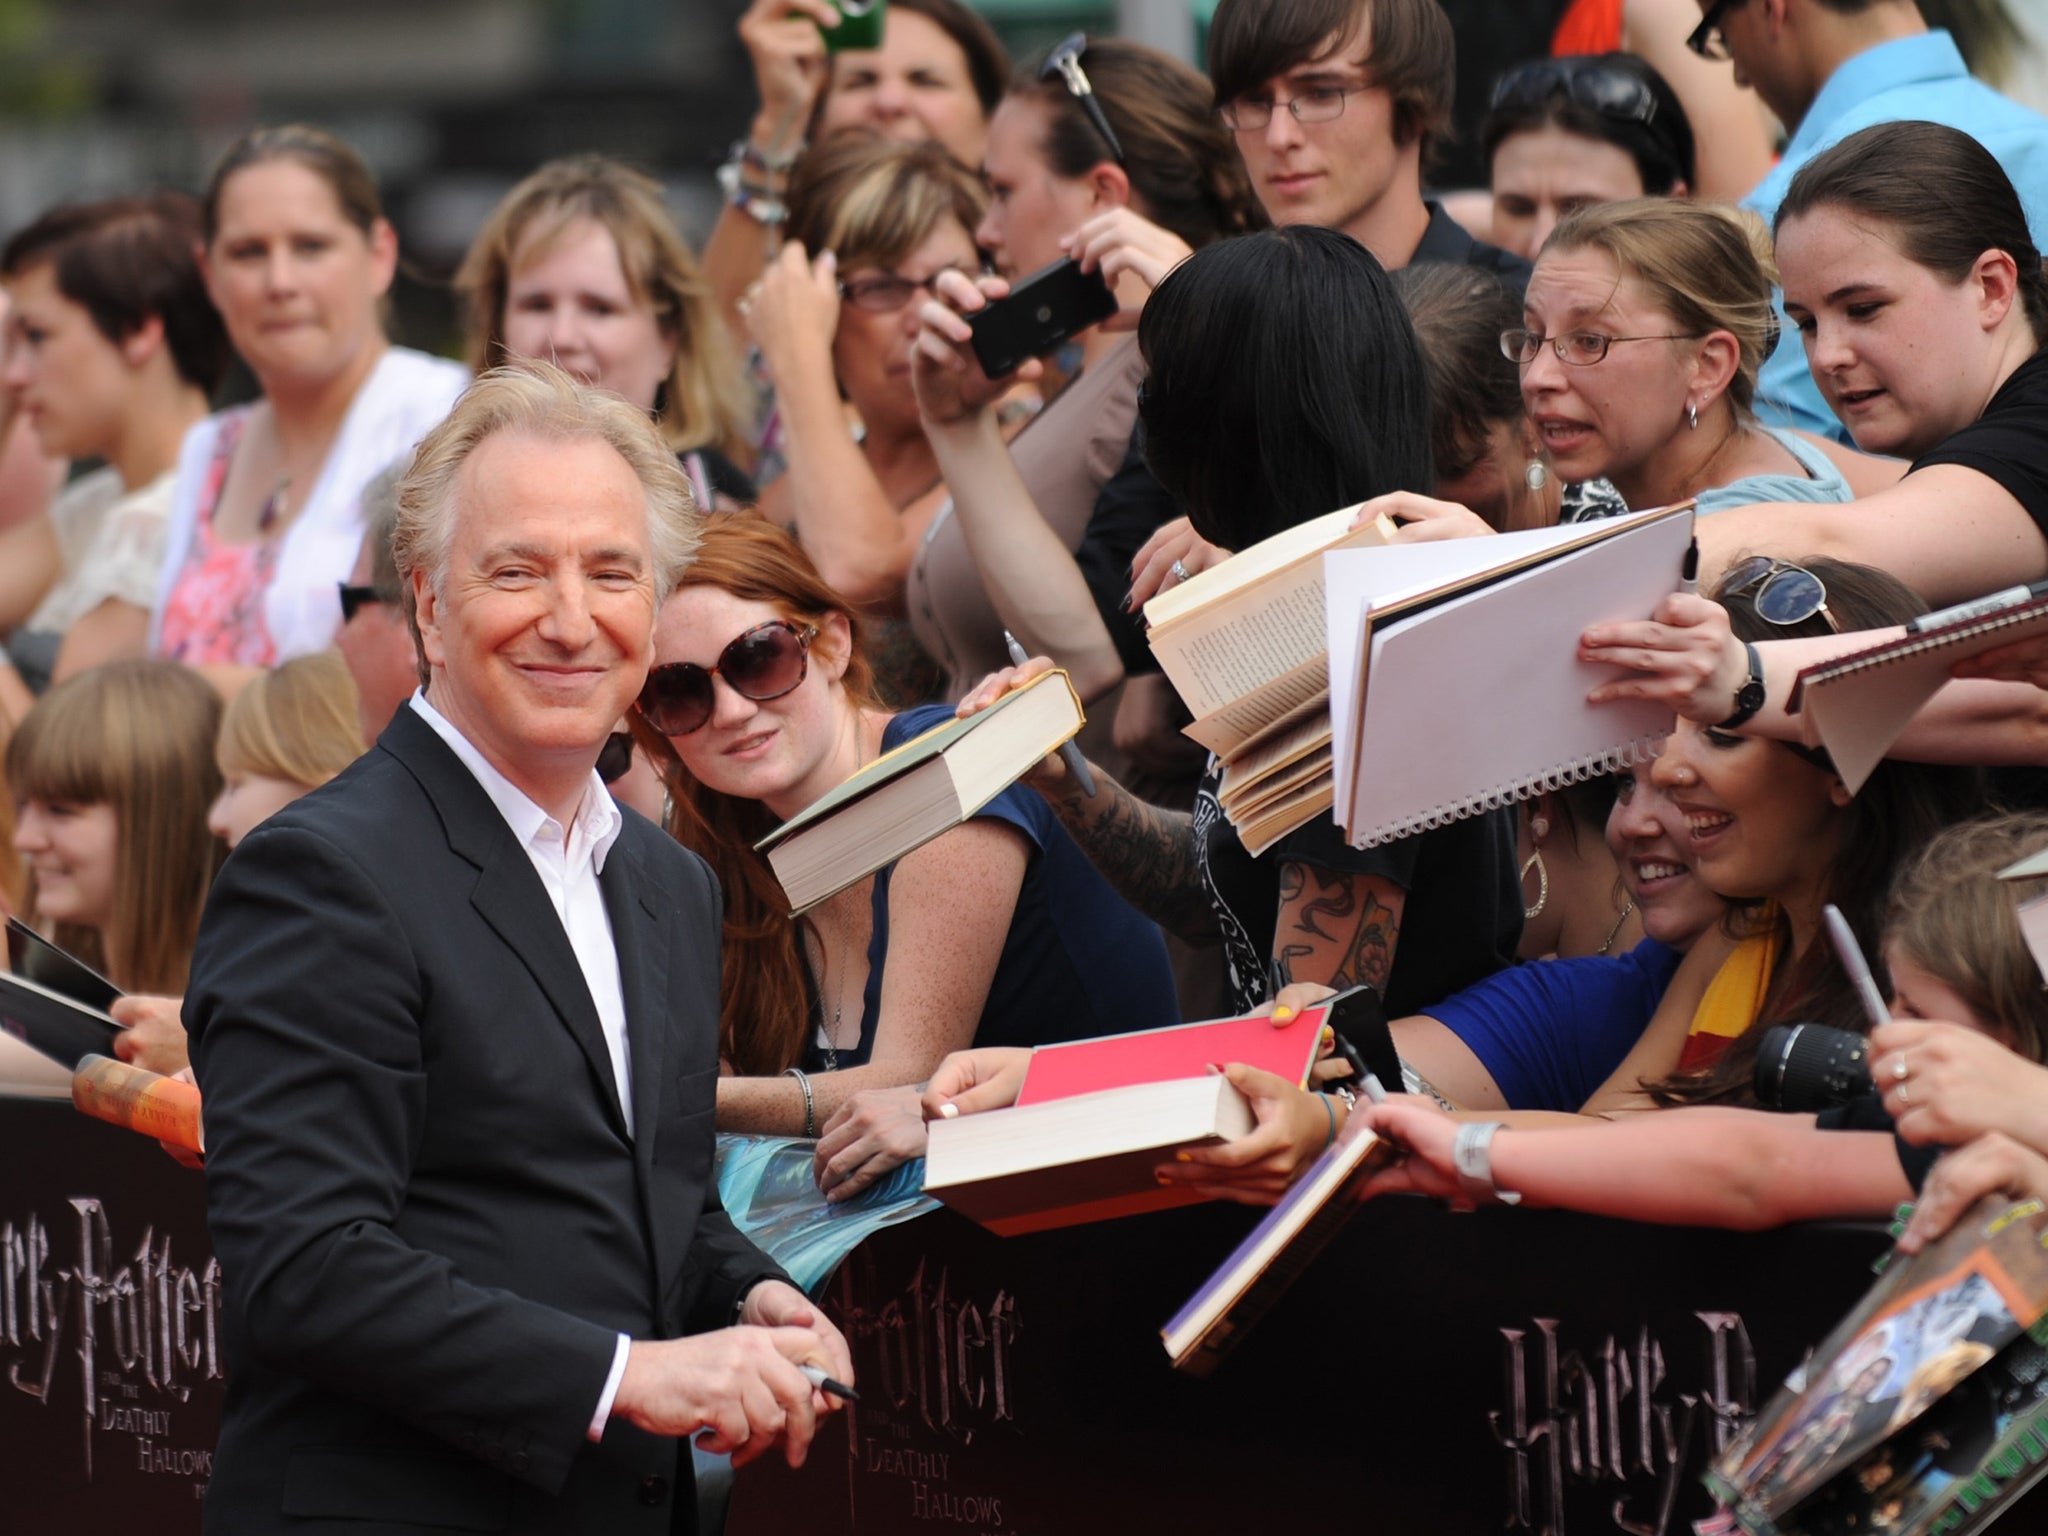 Alan Rickman signs autographs as he arrives for the North American premiere of Harry Potter and the Deathly Hallows Part 2 at Lincoln Center in New York, 2011